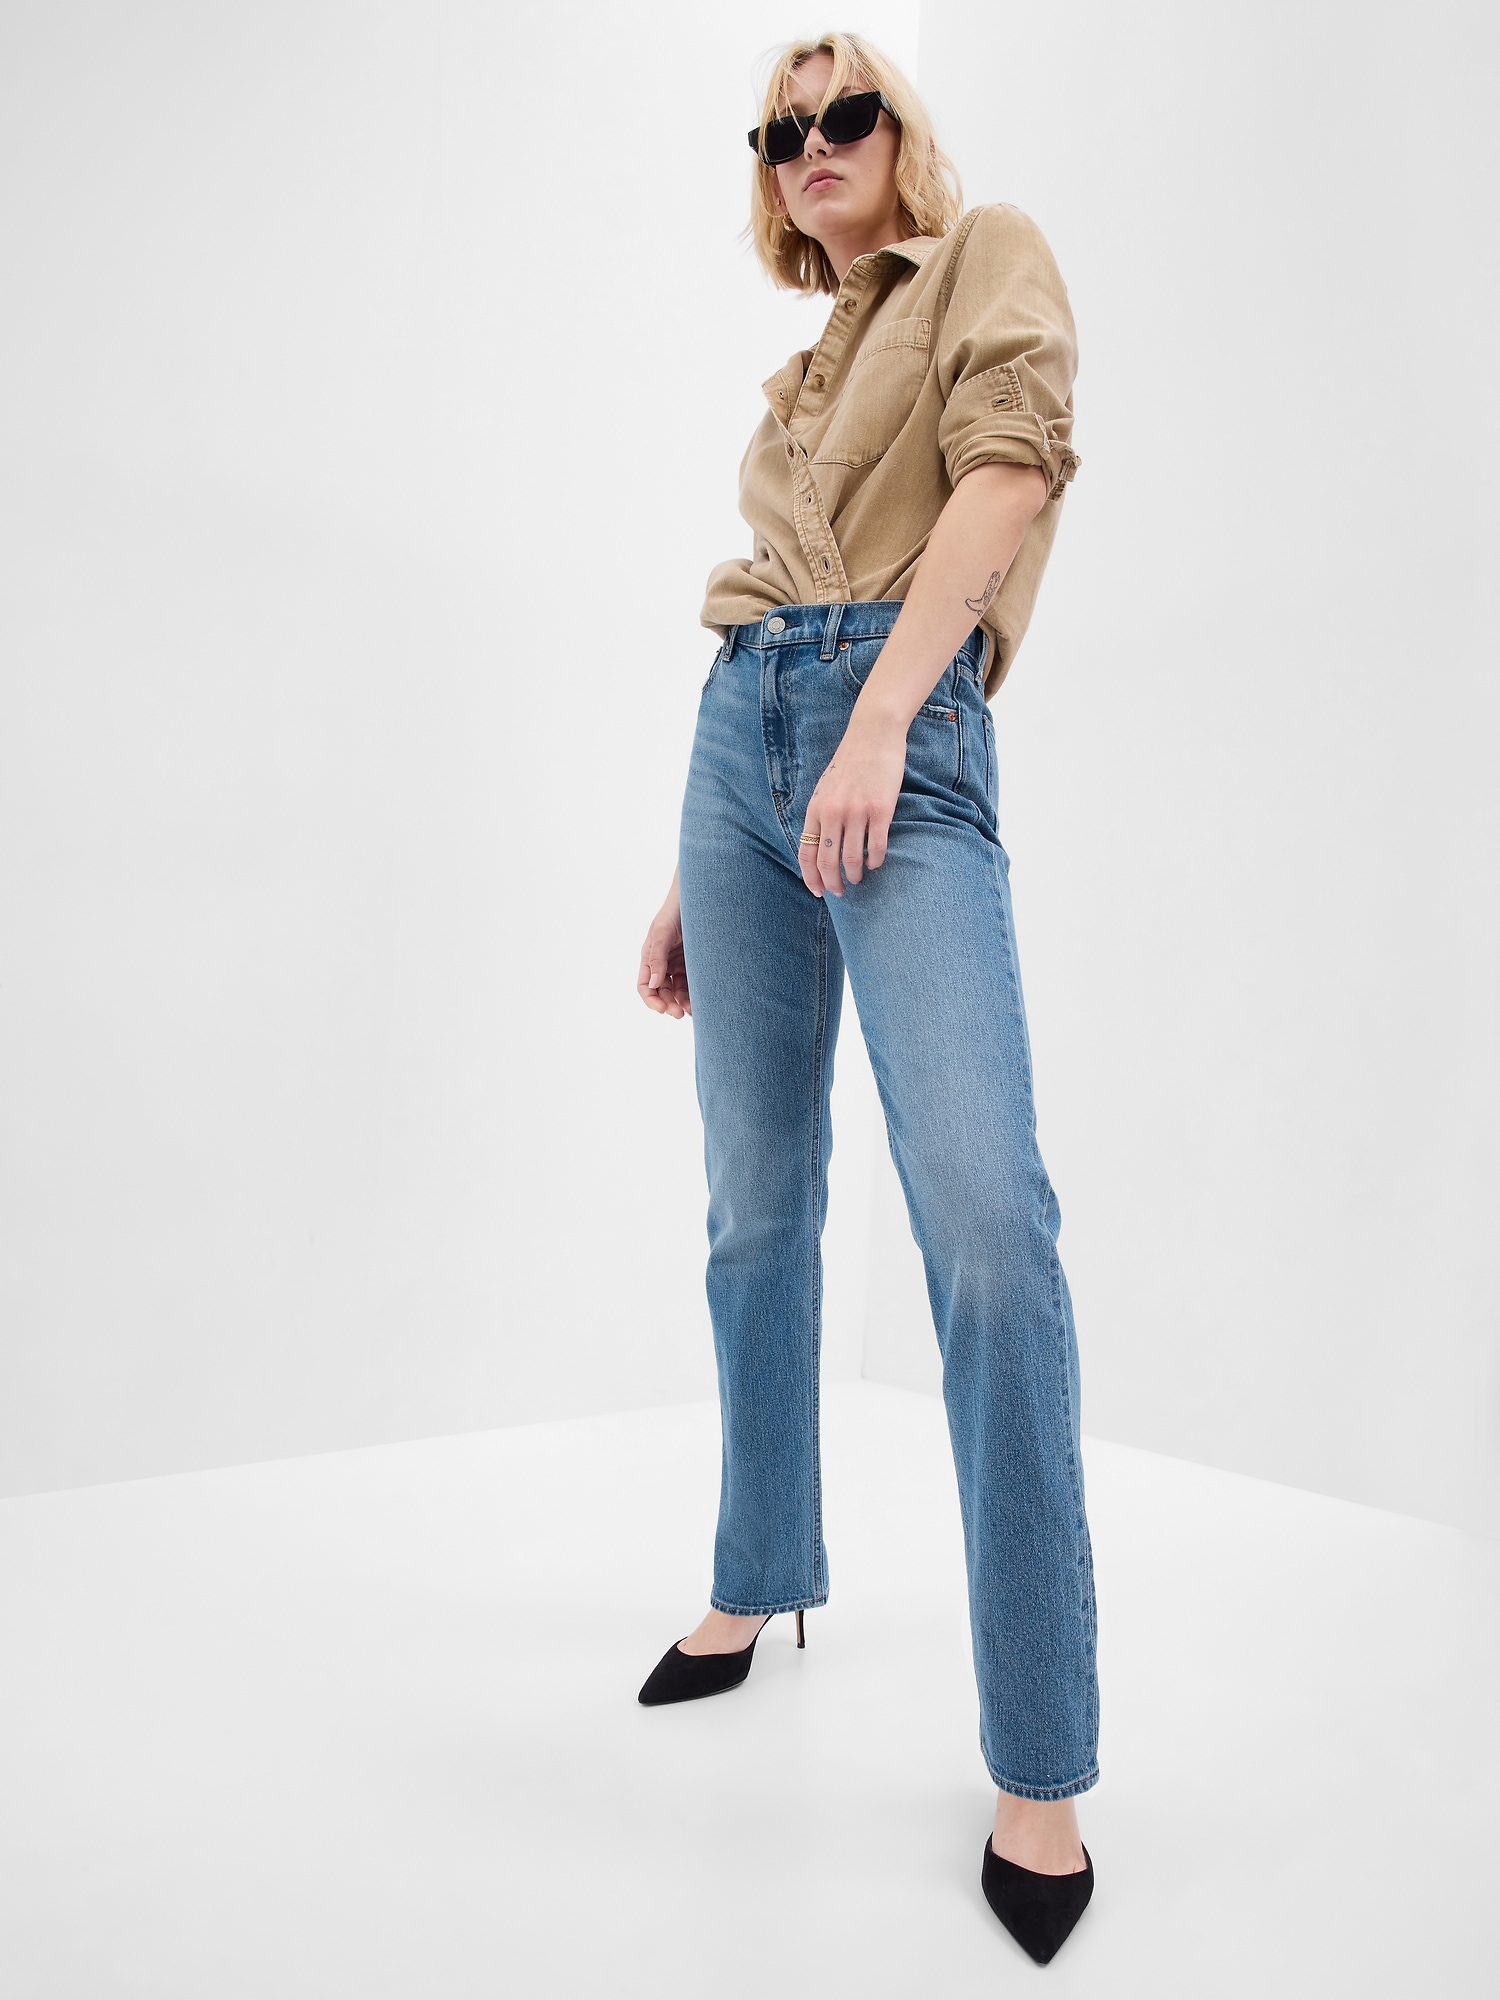 Gap ’90s Straight Jeans with Washwell